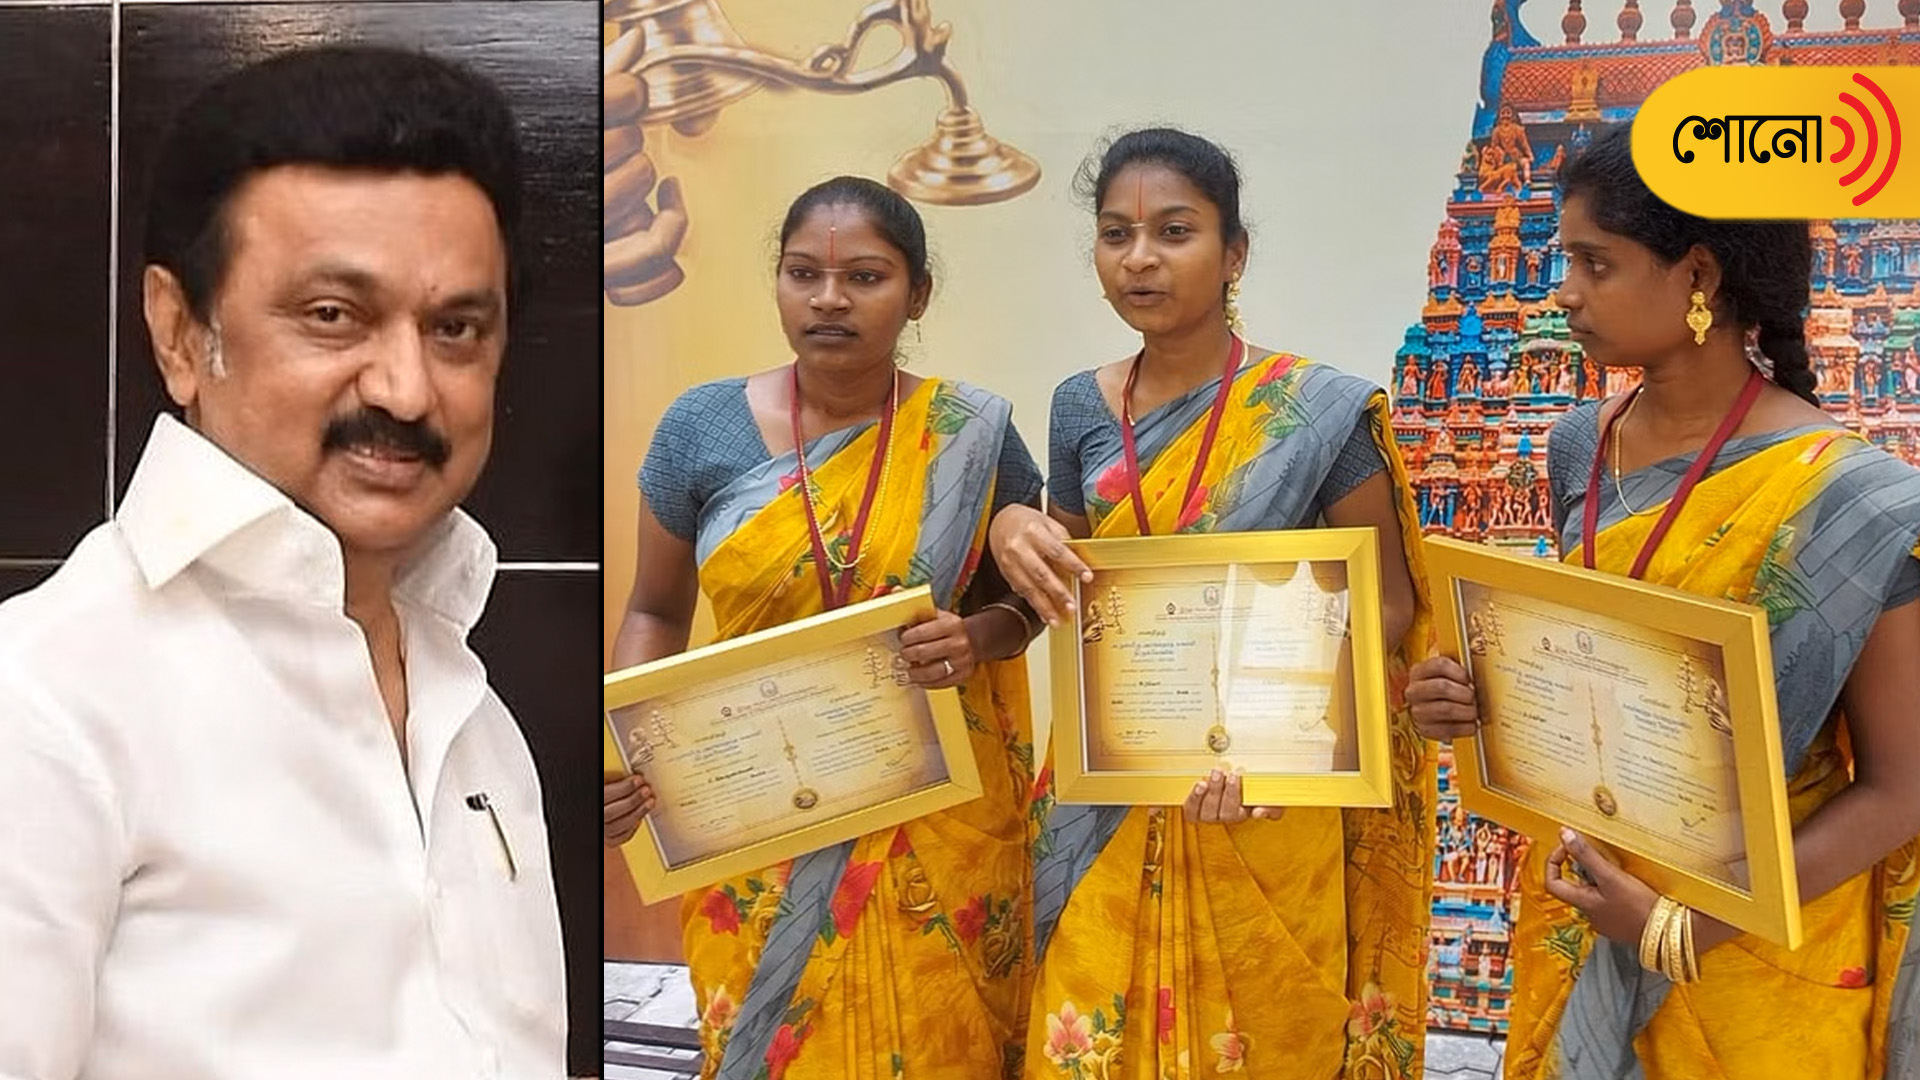 3 Tamil Nadu women set to become temple priests, says CM Stalin